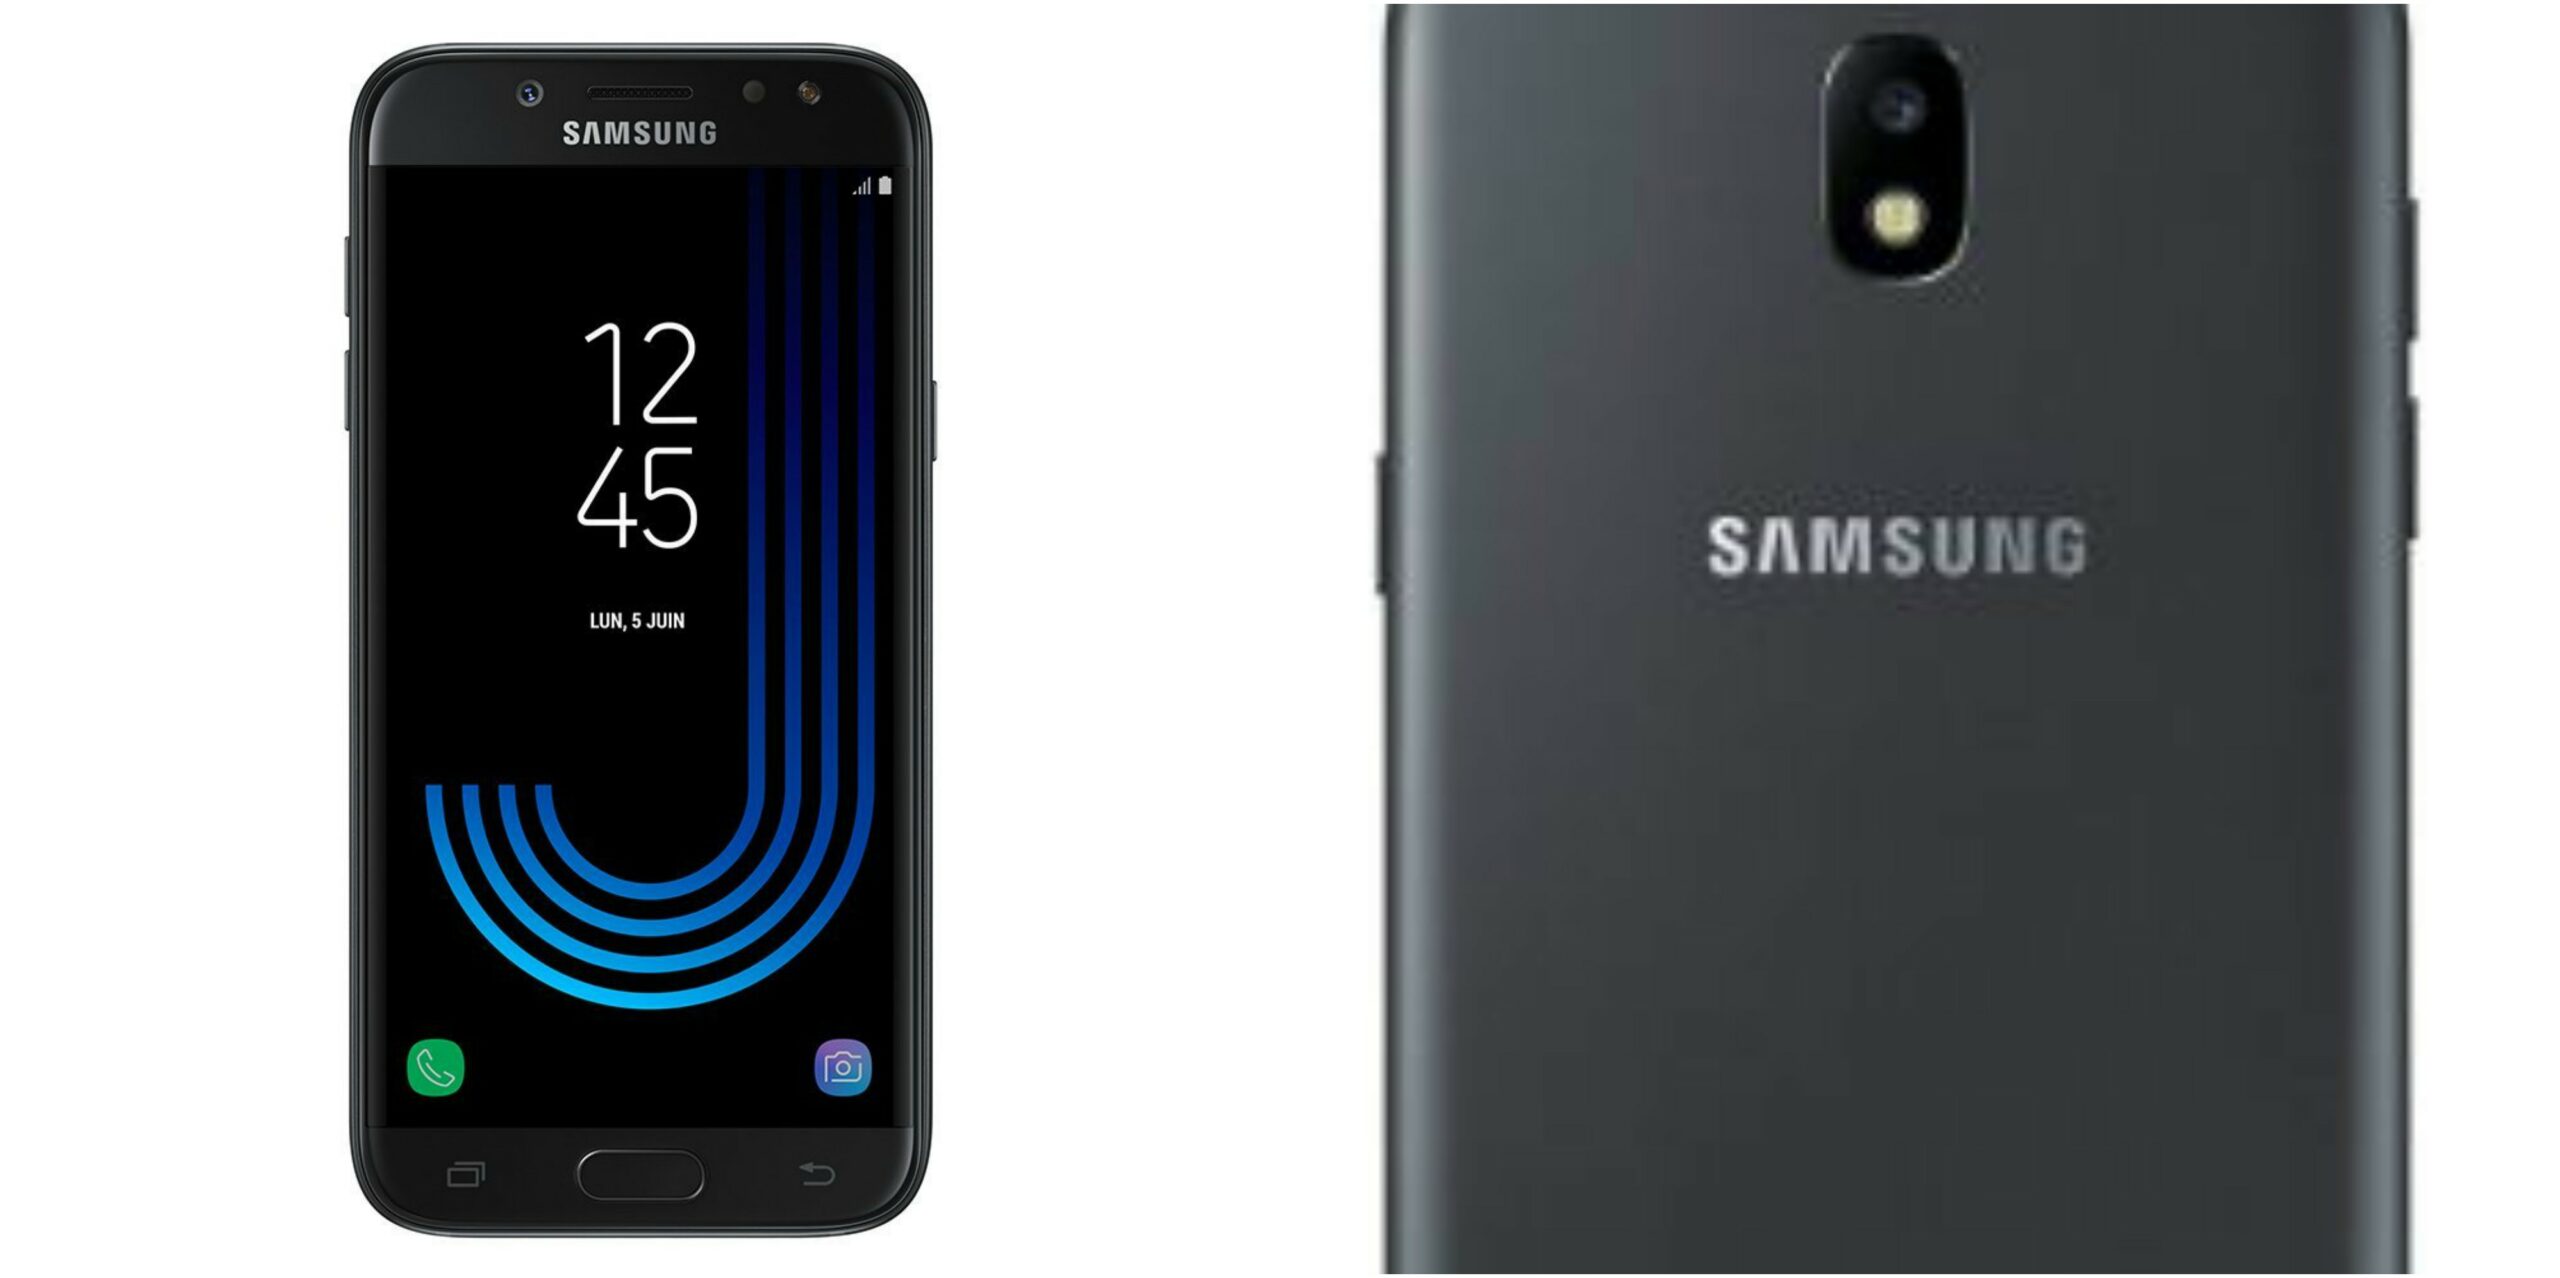 Samsung Galaxy J5 (2017) Is Accessible Online Before It's Official Launch